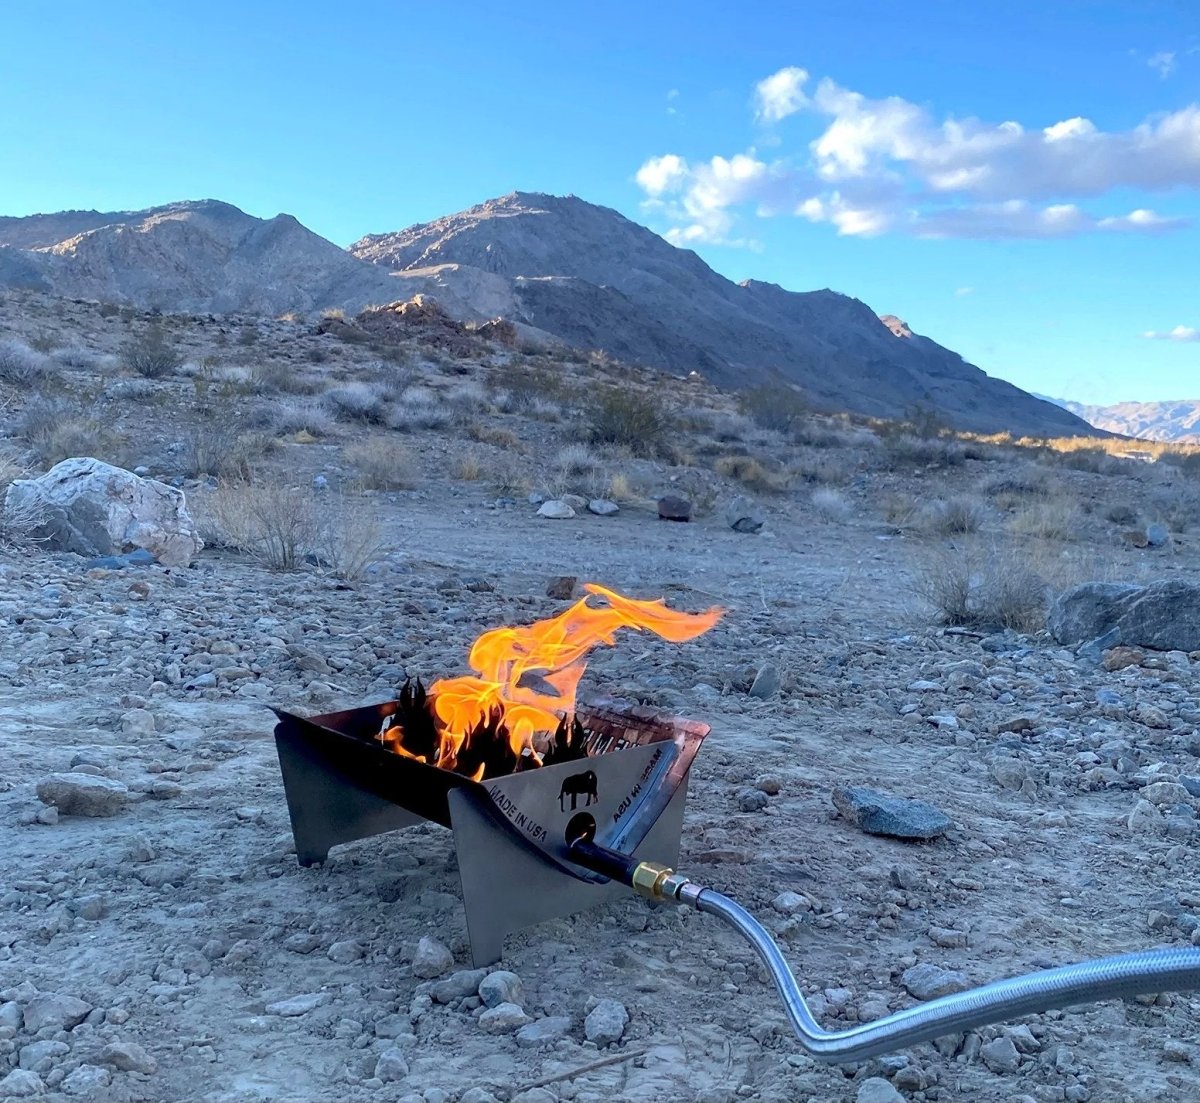 The Fire Pit - Overland Bound